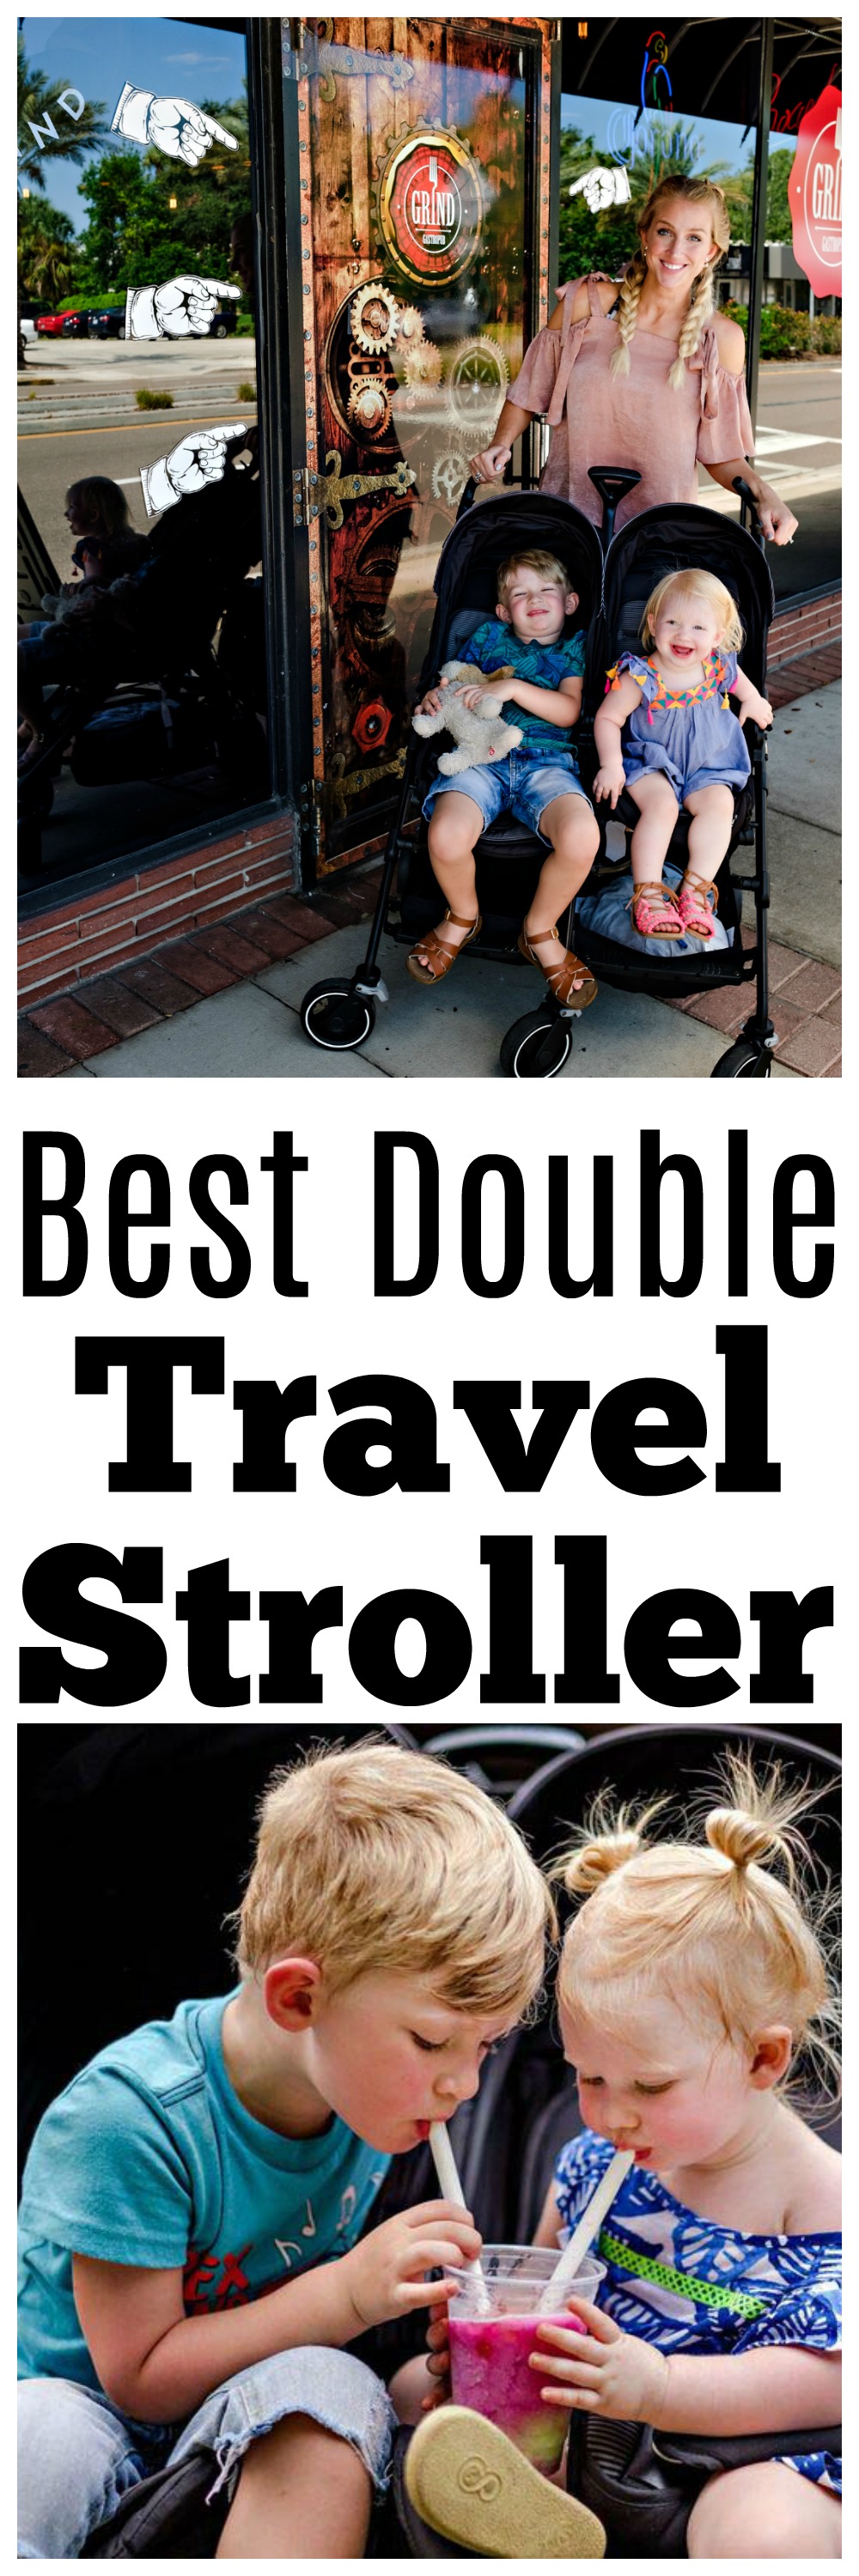 best travel double stroller - The Best Double Stroller For Traveling with Maxi Cosi by Atlanta travel blogger Happily Hughes